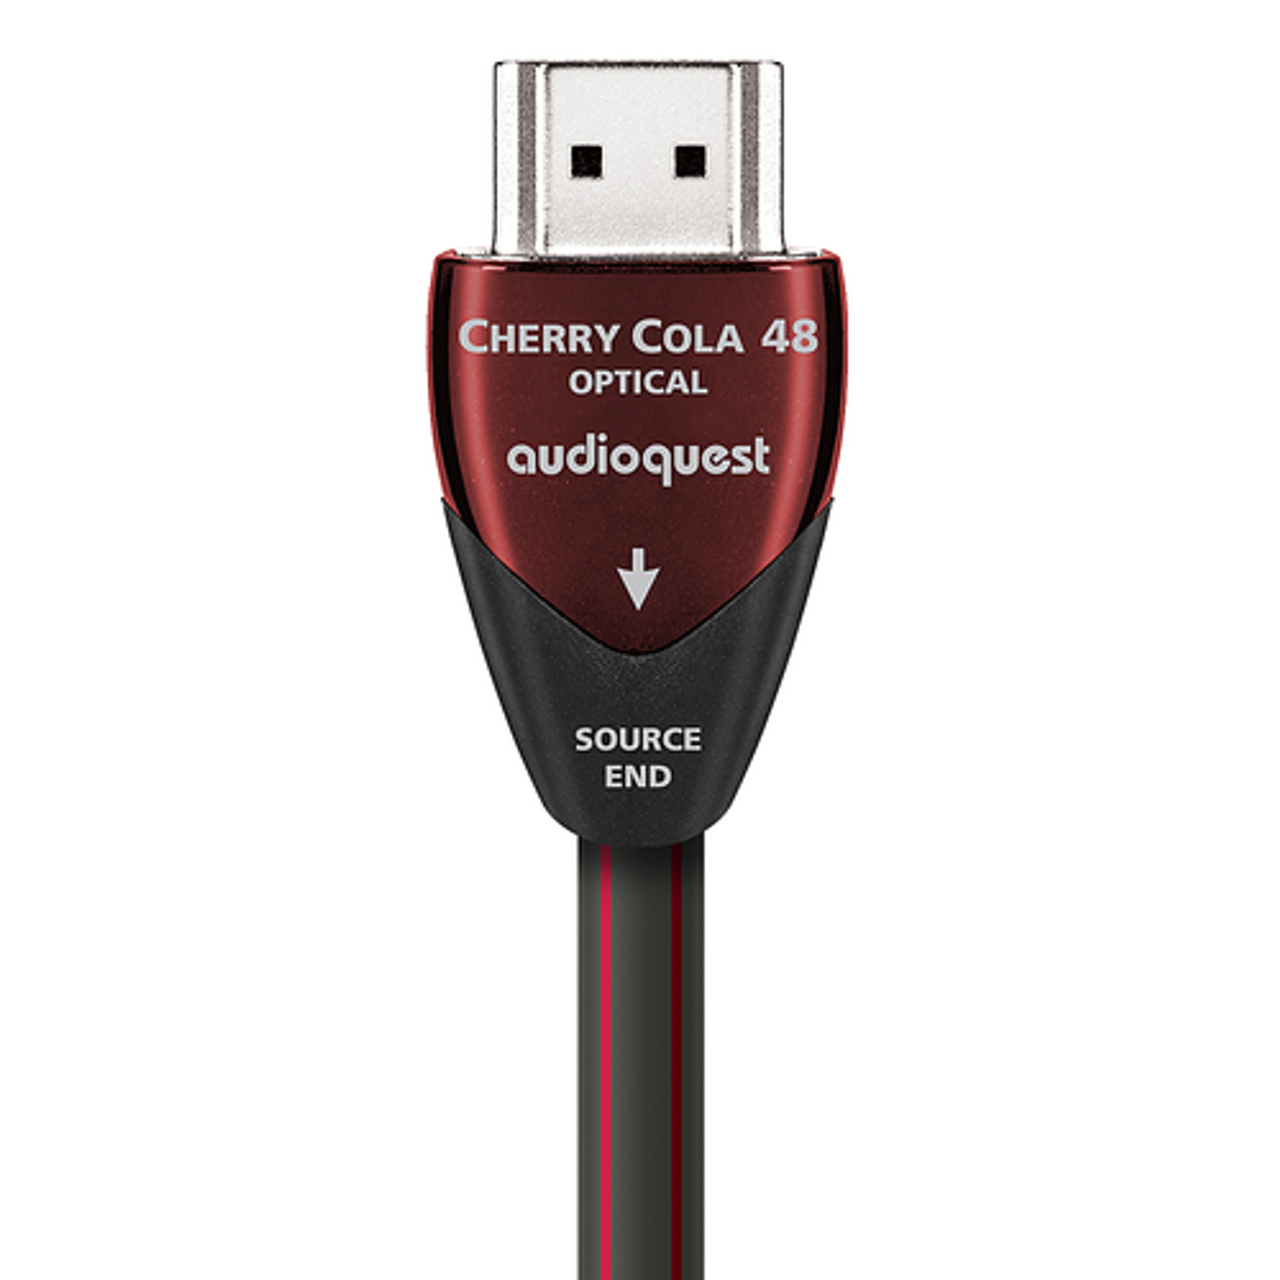 AudioQuest - Cherry Cola 50' 8K-10K 48Gbps Active Optical HDMI Cable - Black/Red